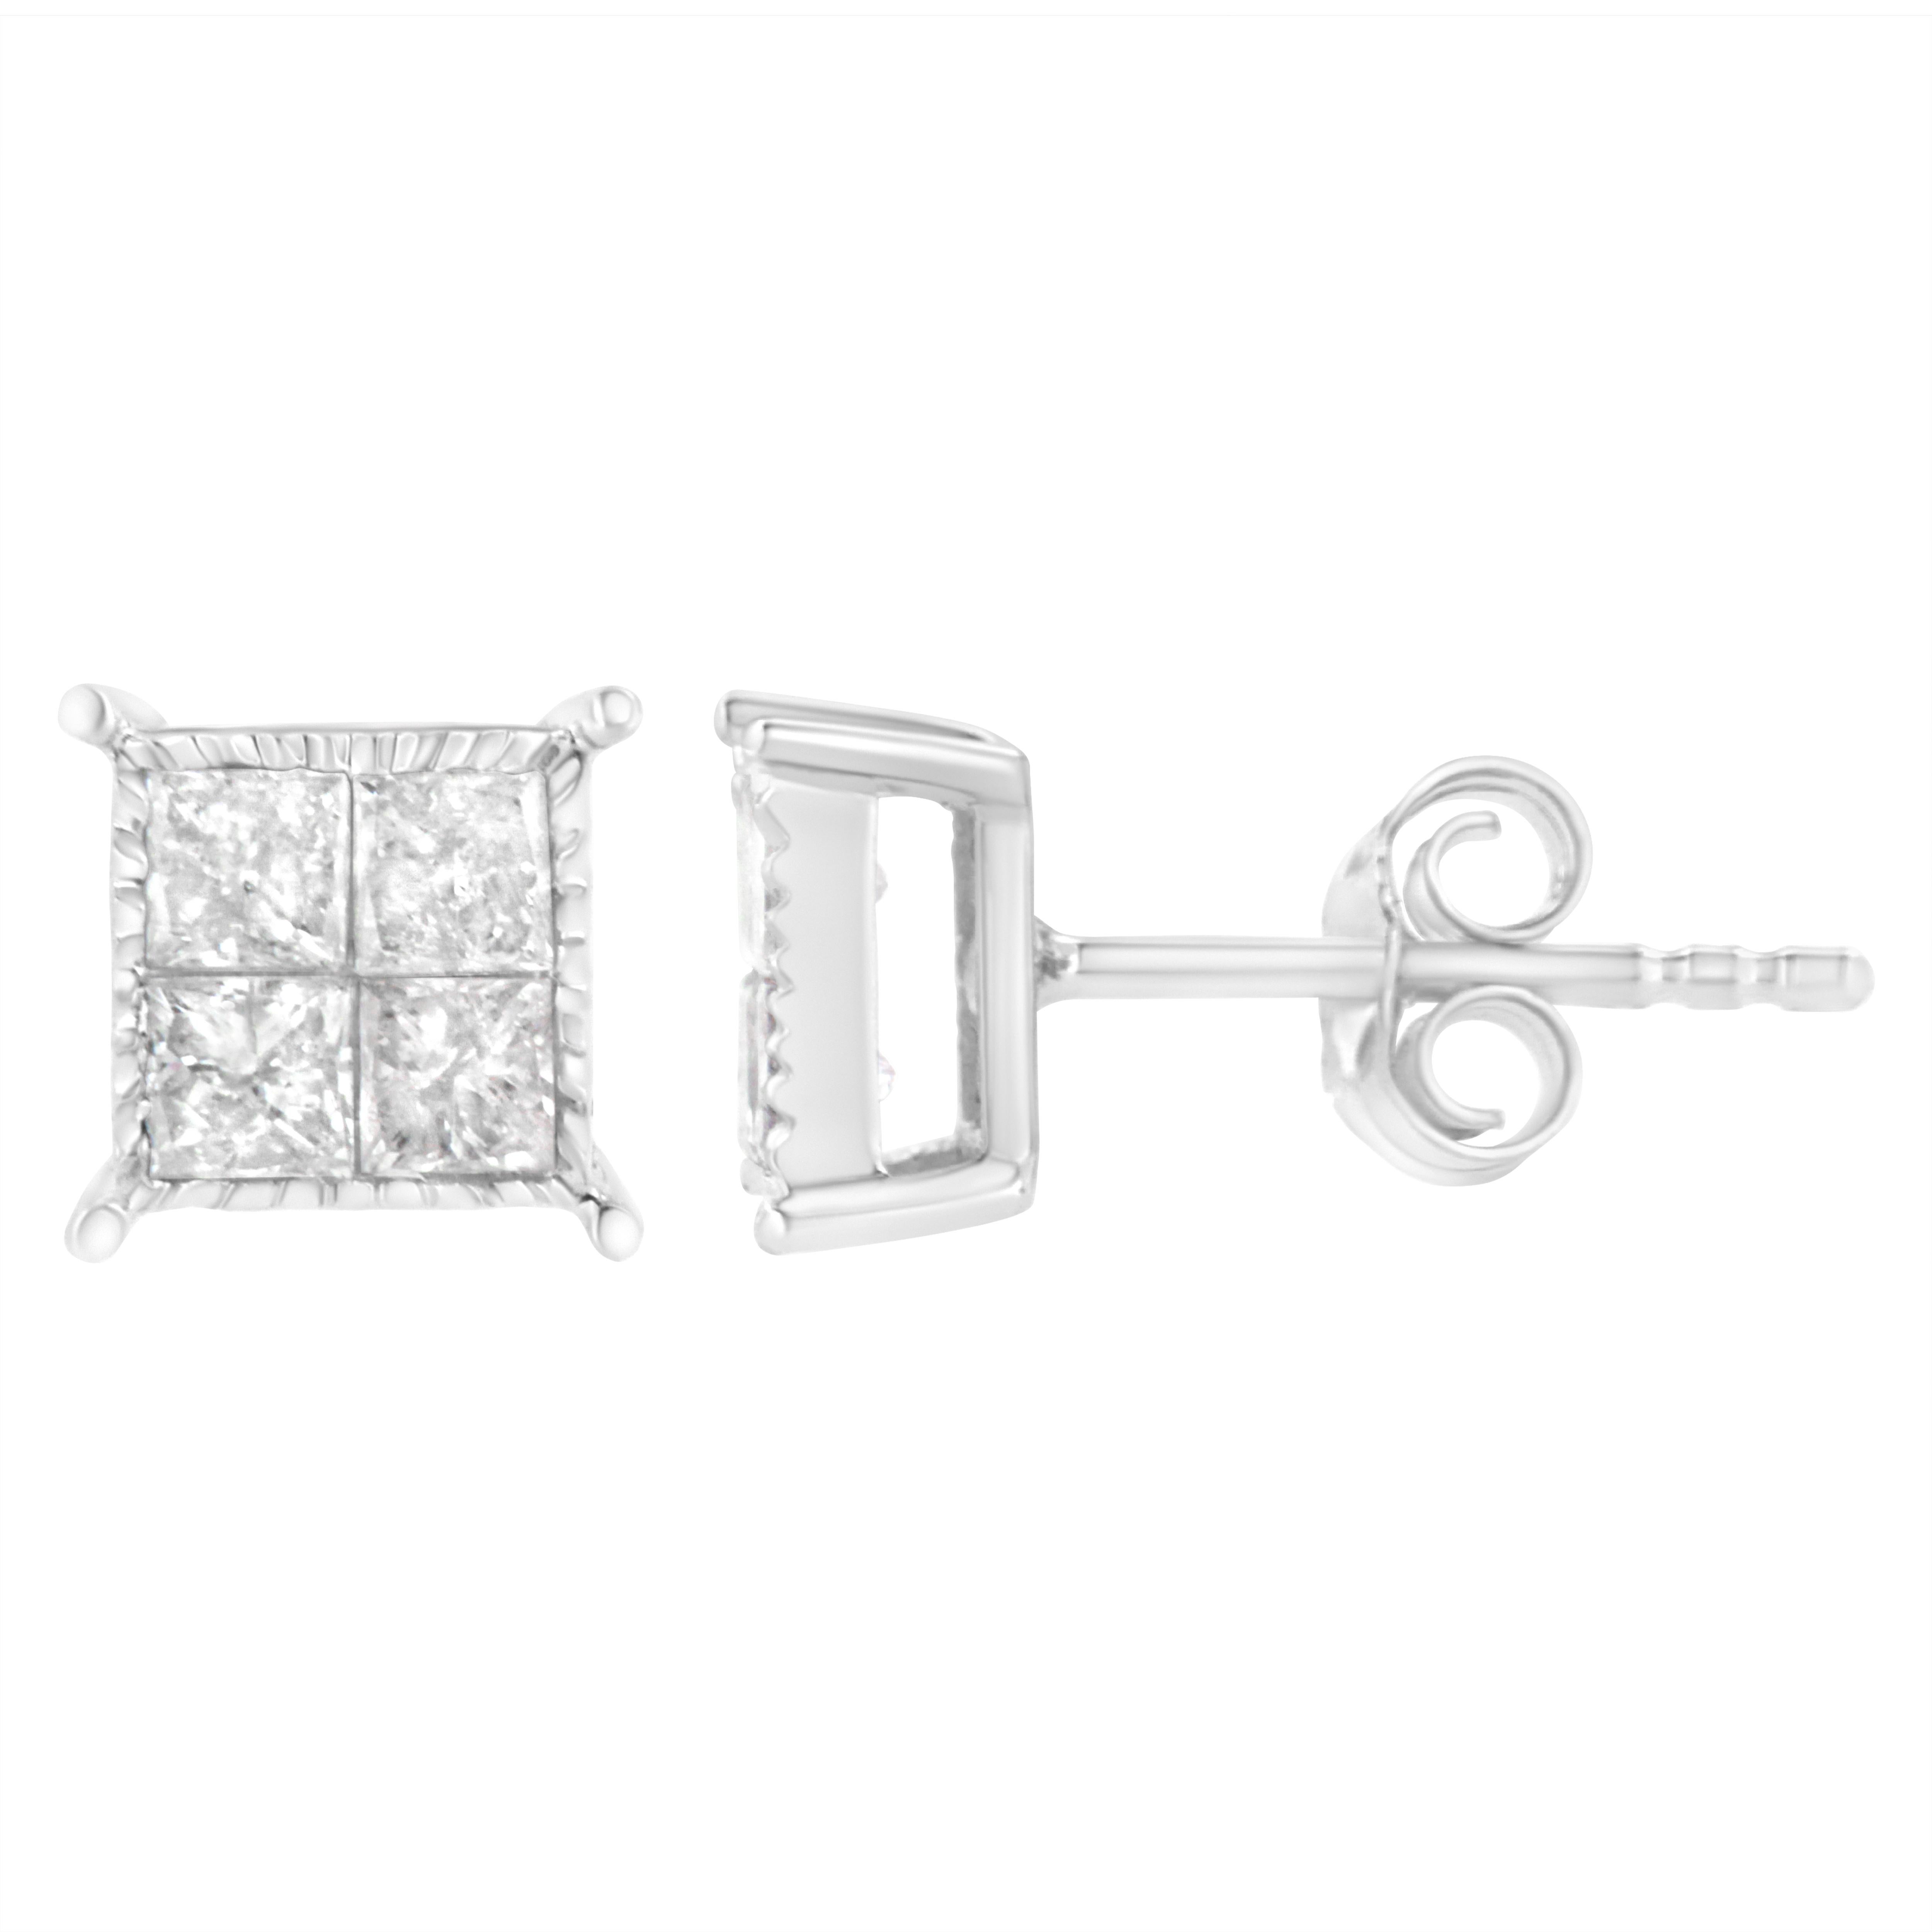 These elegant sterling silver stud earrings features 3/4 carats of beautiful, natural diamonds. Each stud is embellished with 4 princess-cut diamonds in an invisible setting. These rectangular earrings come with a push back finding and will add the